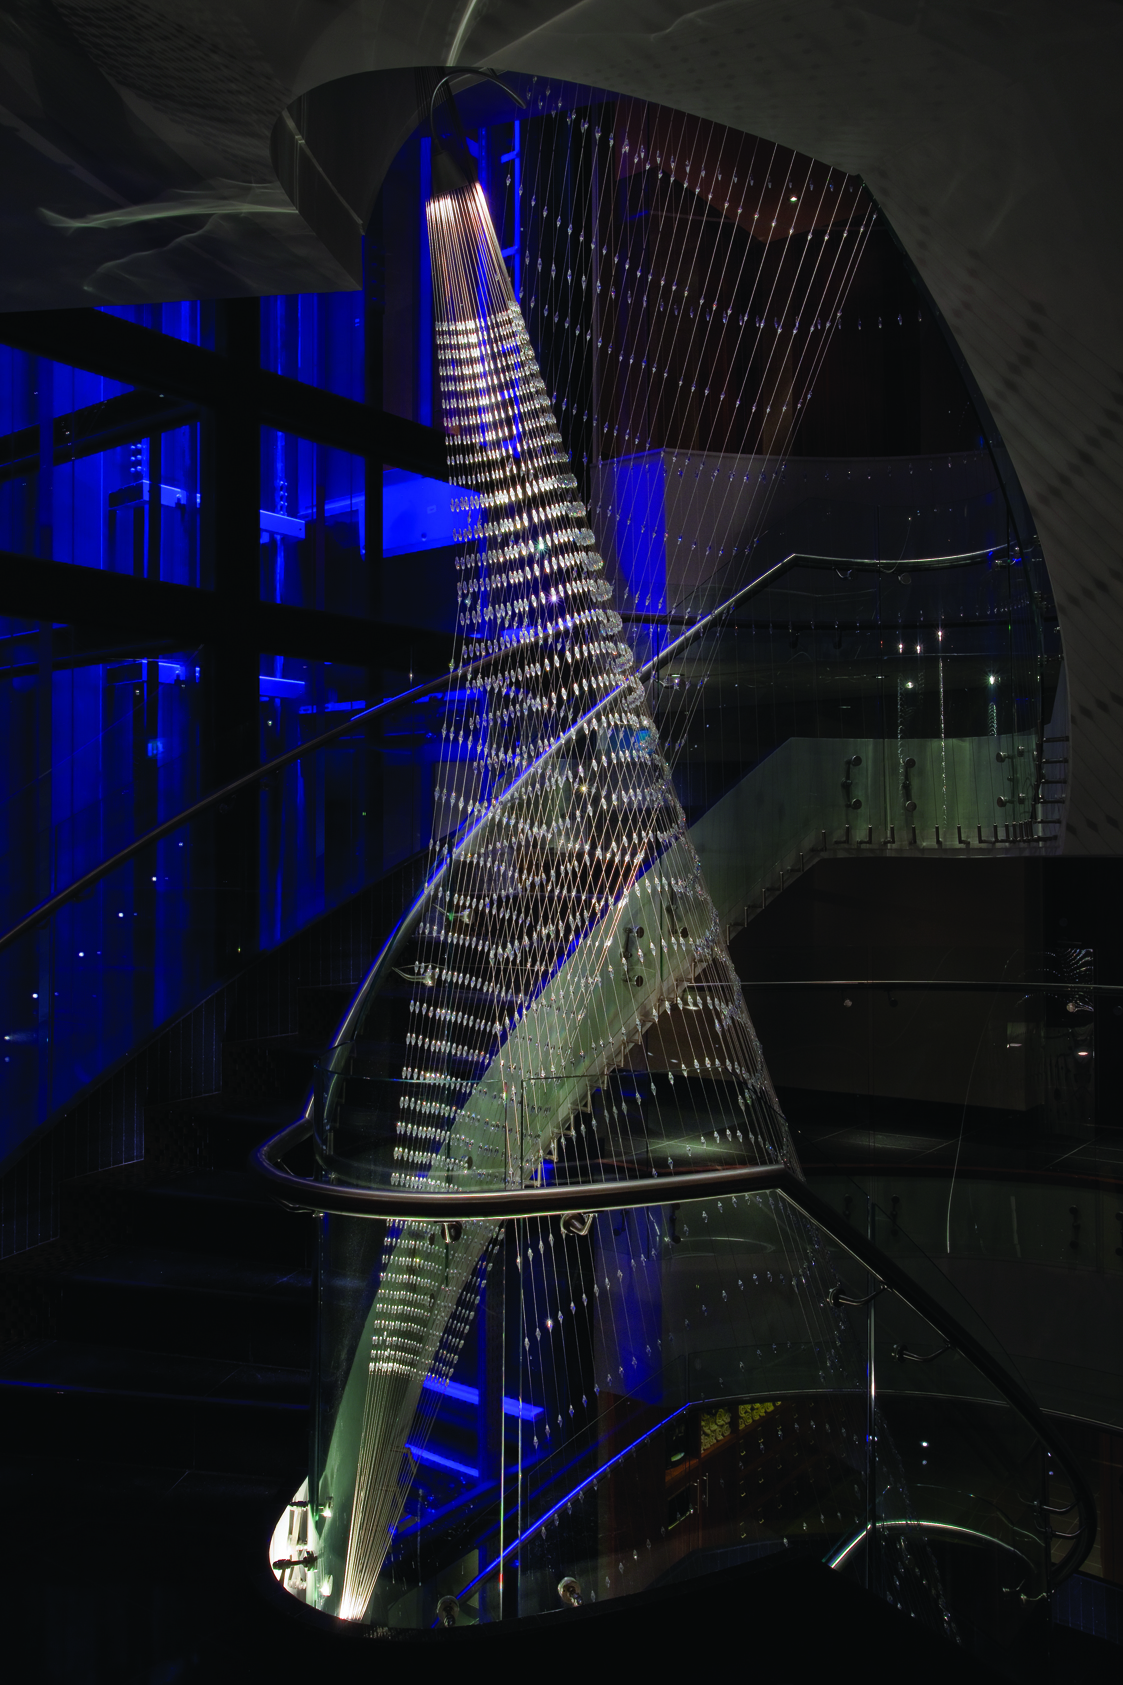 spiral stairs going up with lights spiriling downards